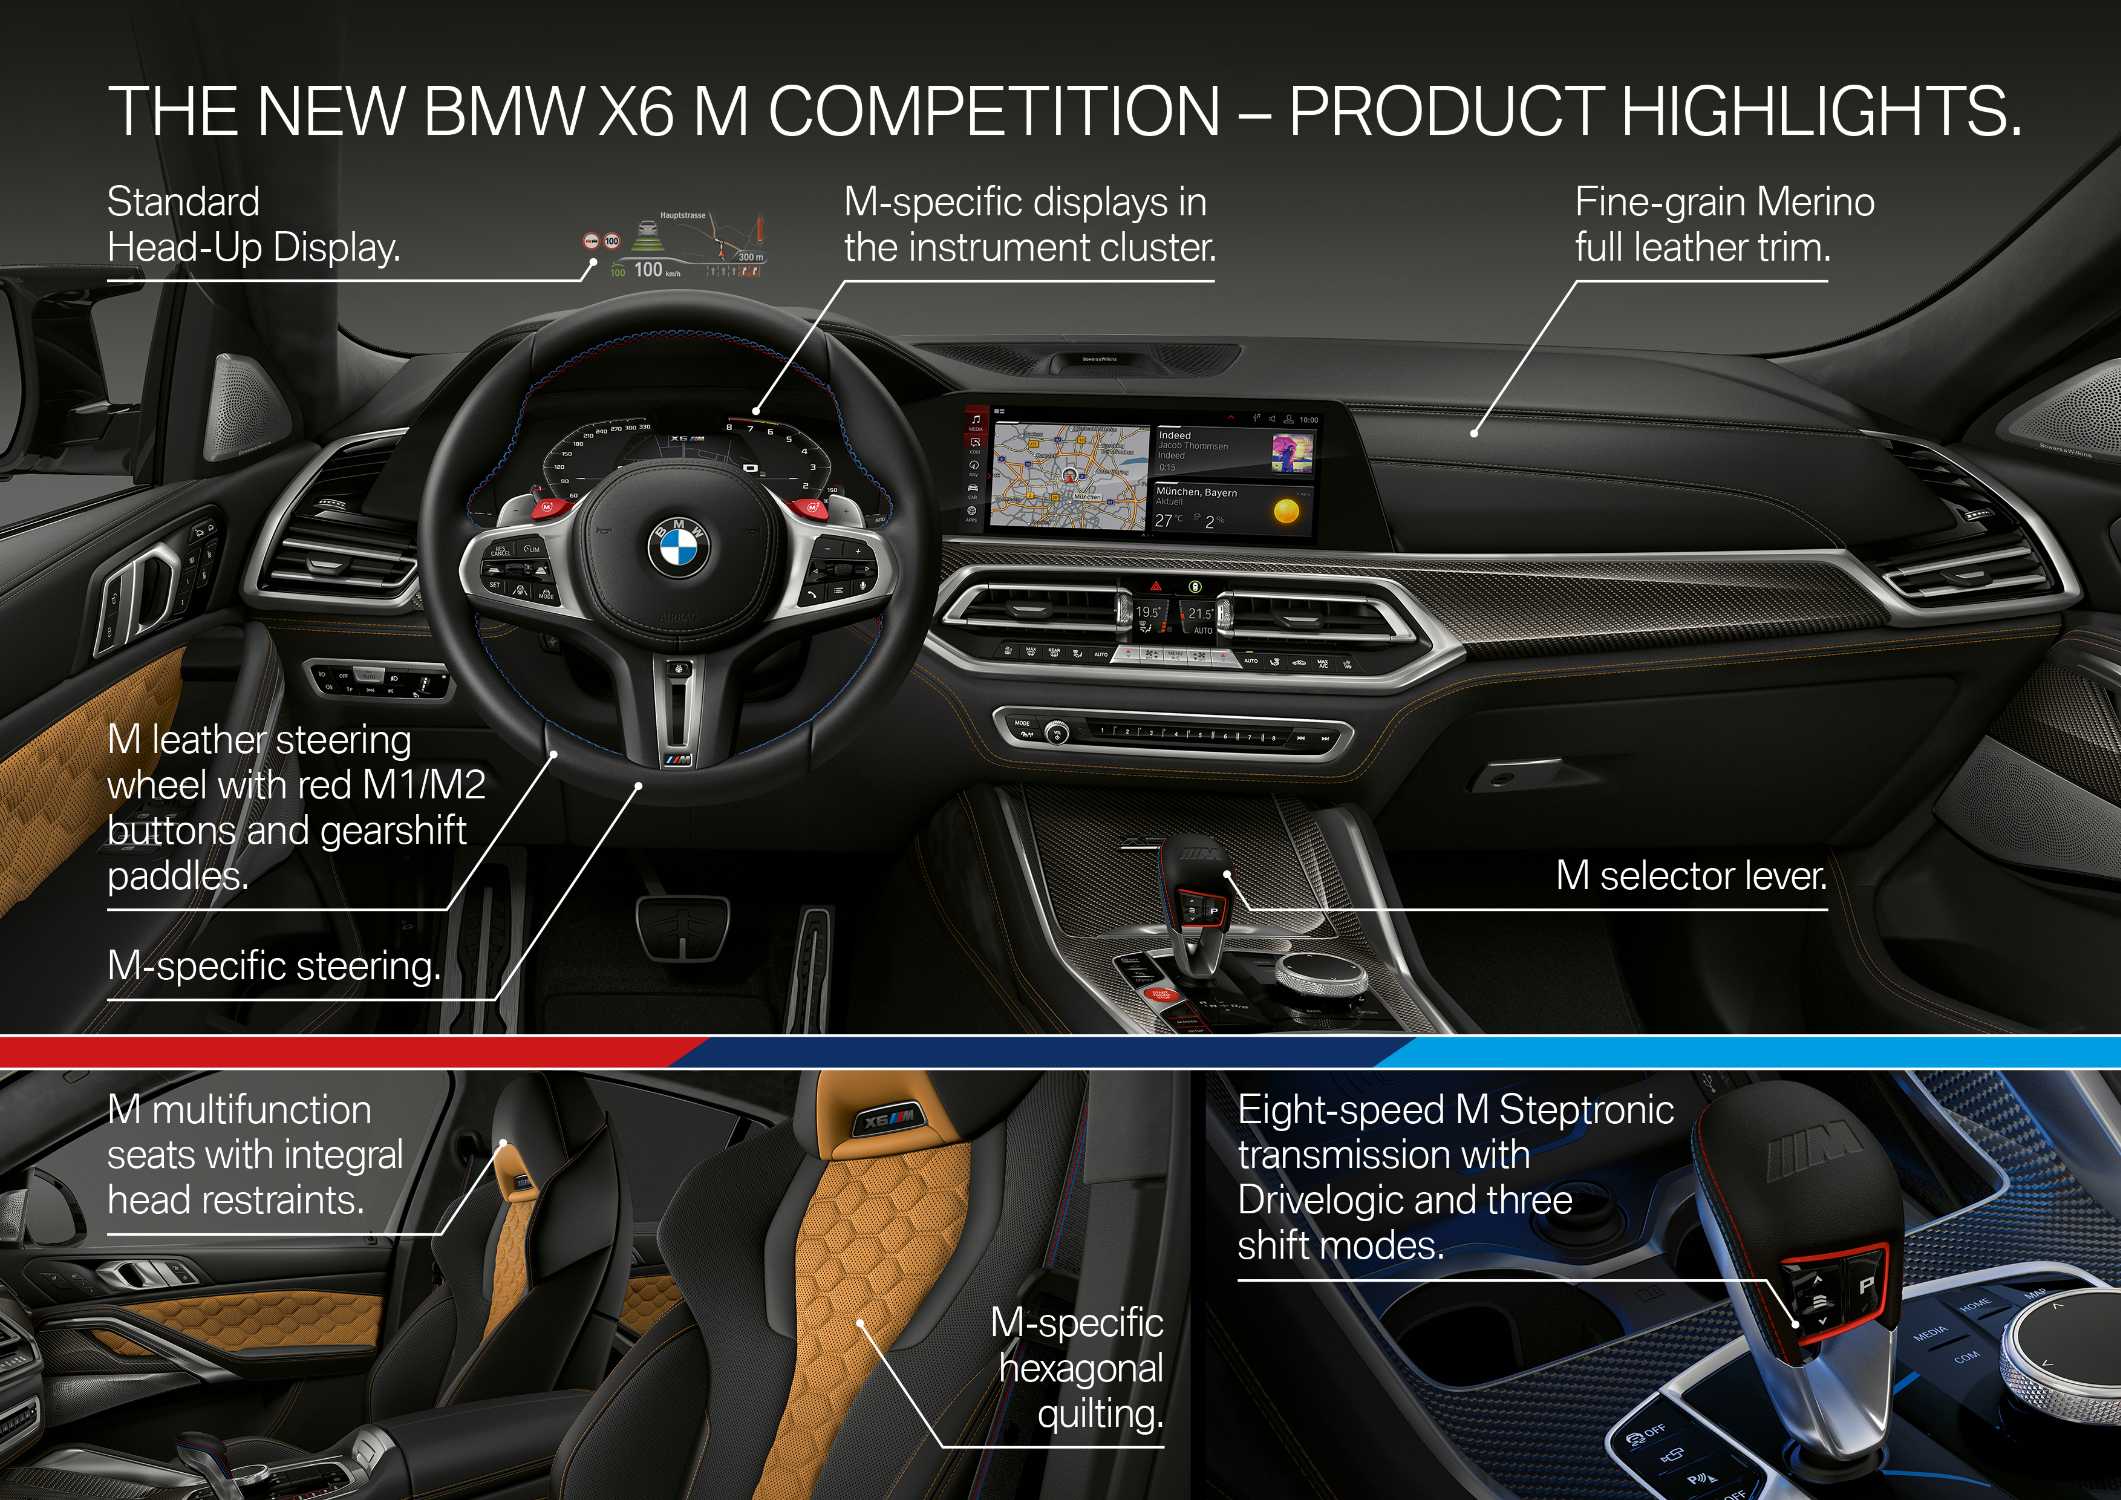 The new BMW X6 M and BMW X6 M Competition. (10/2019)